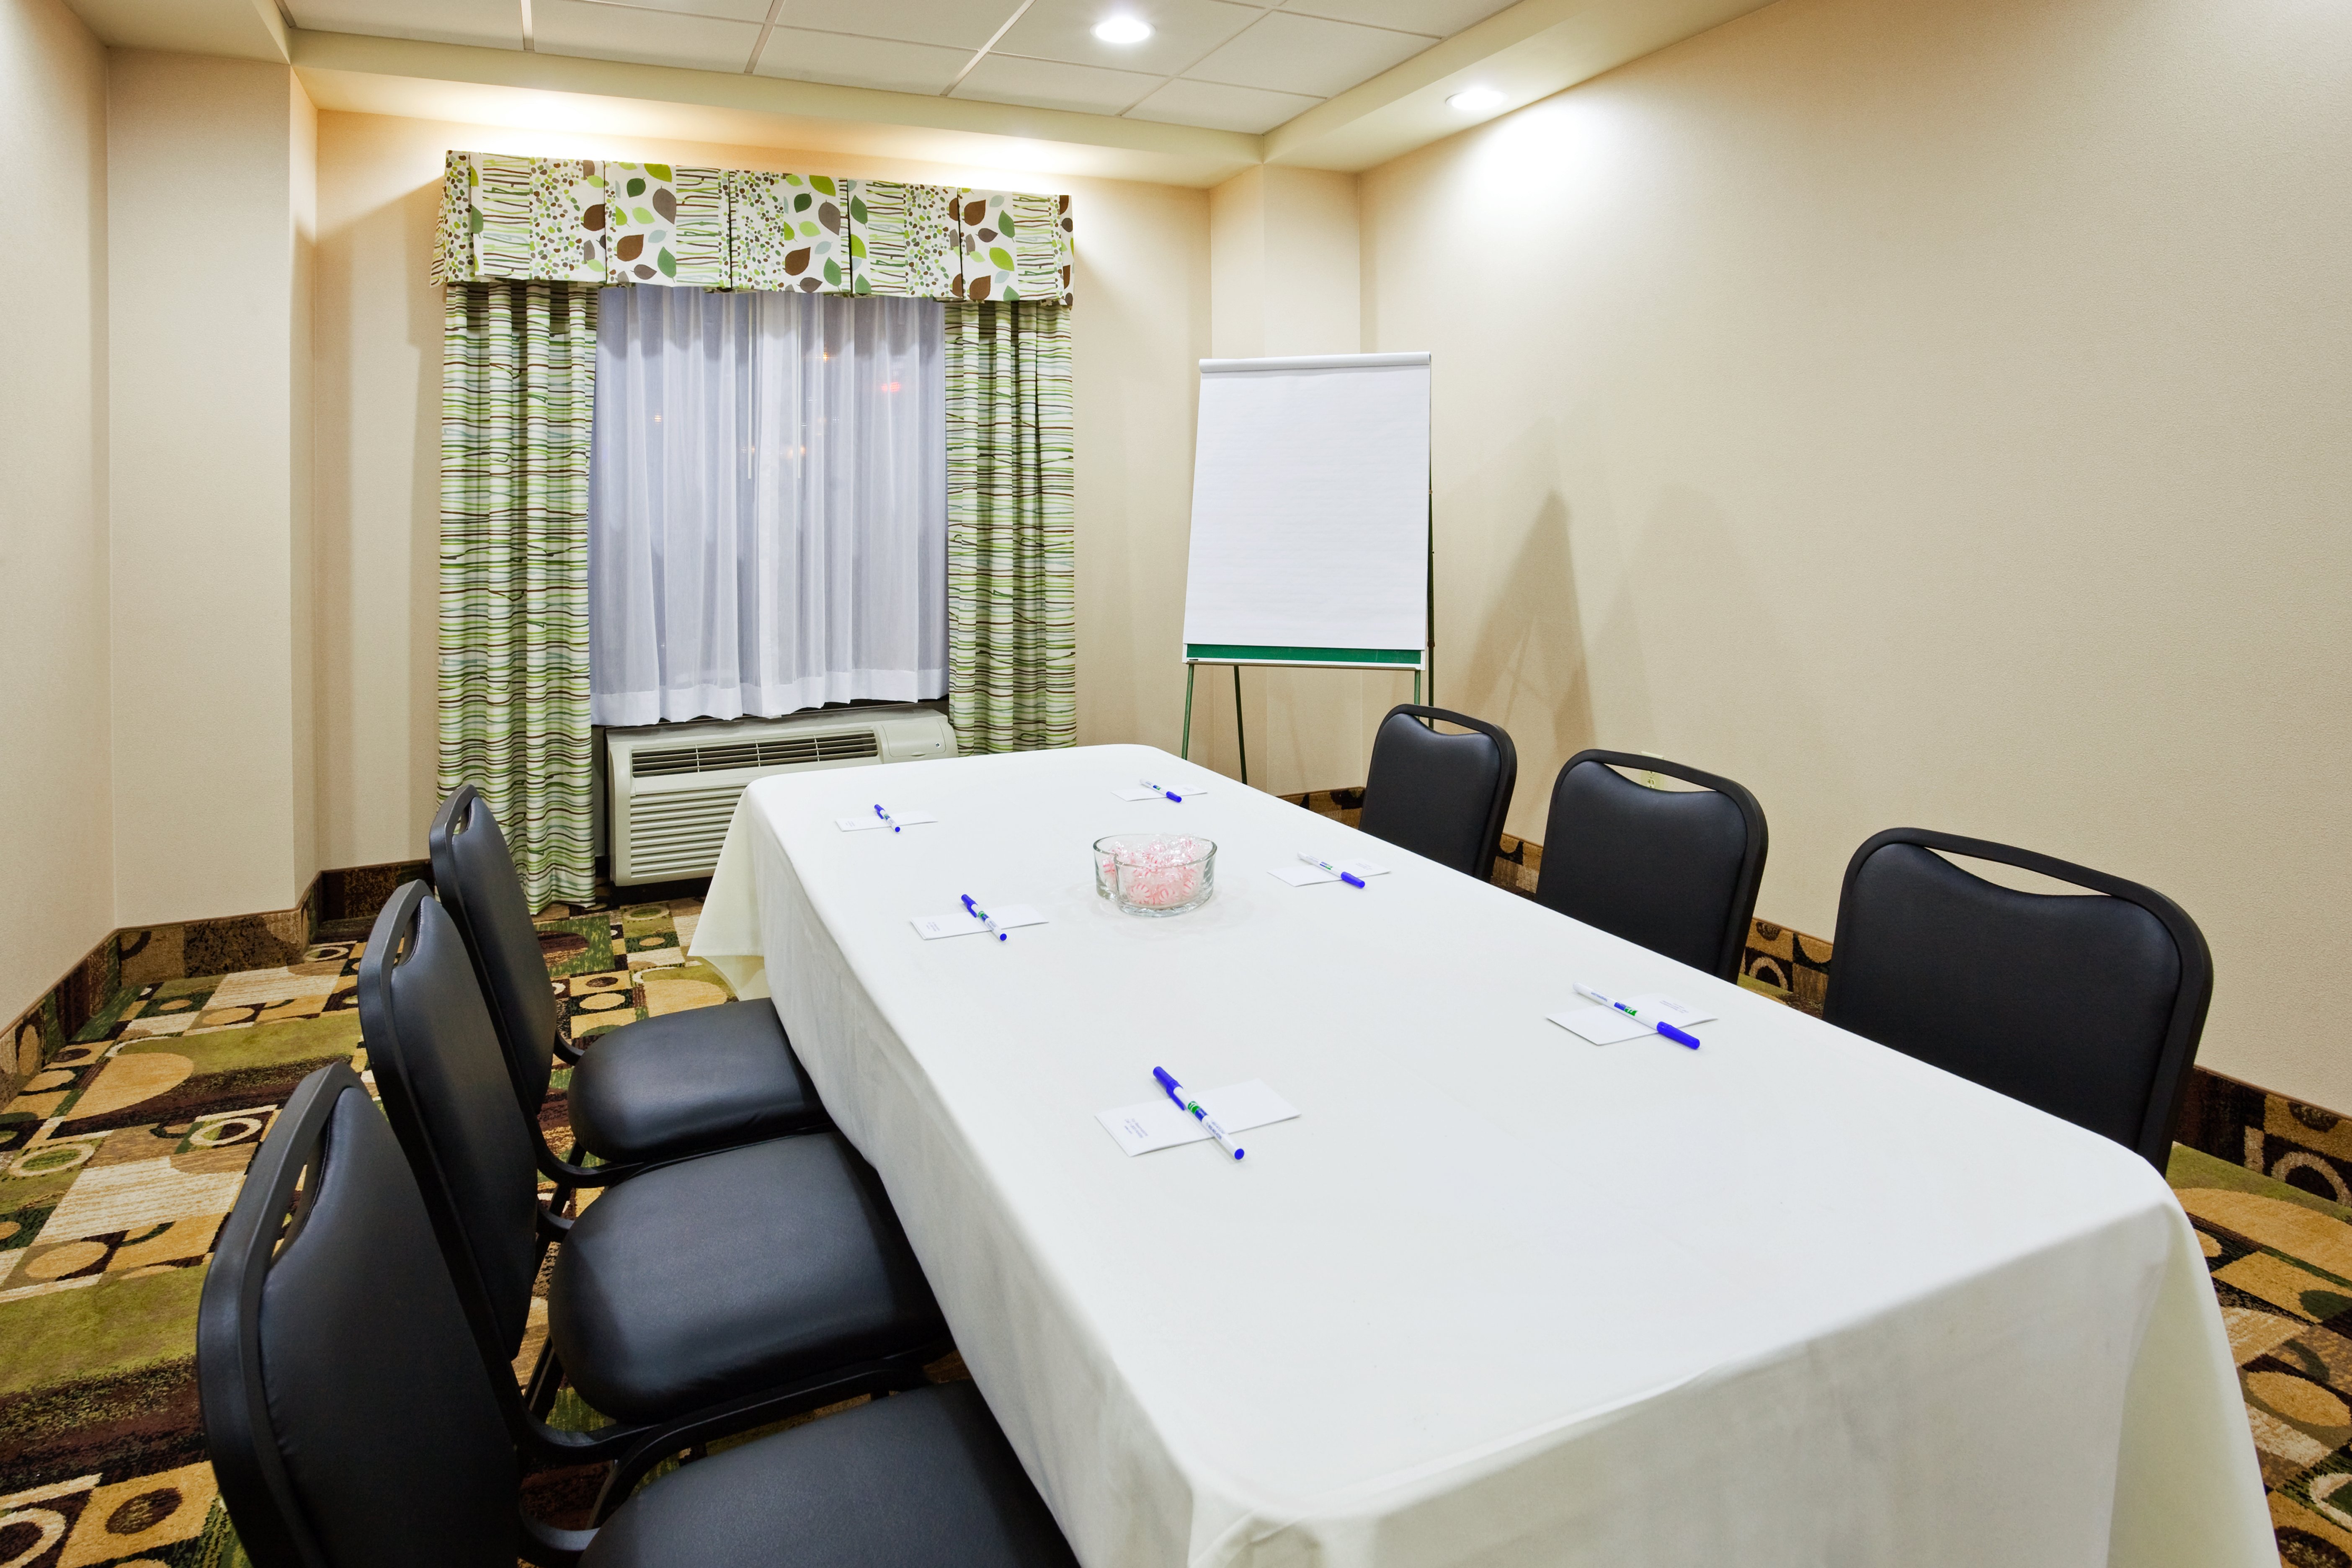 We can host your small meetings!